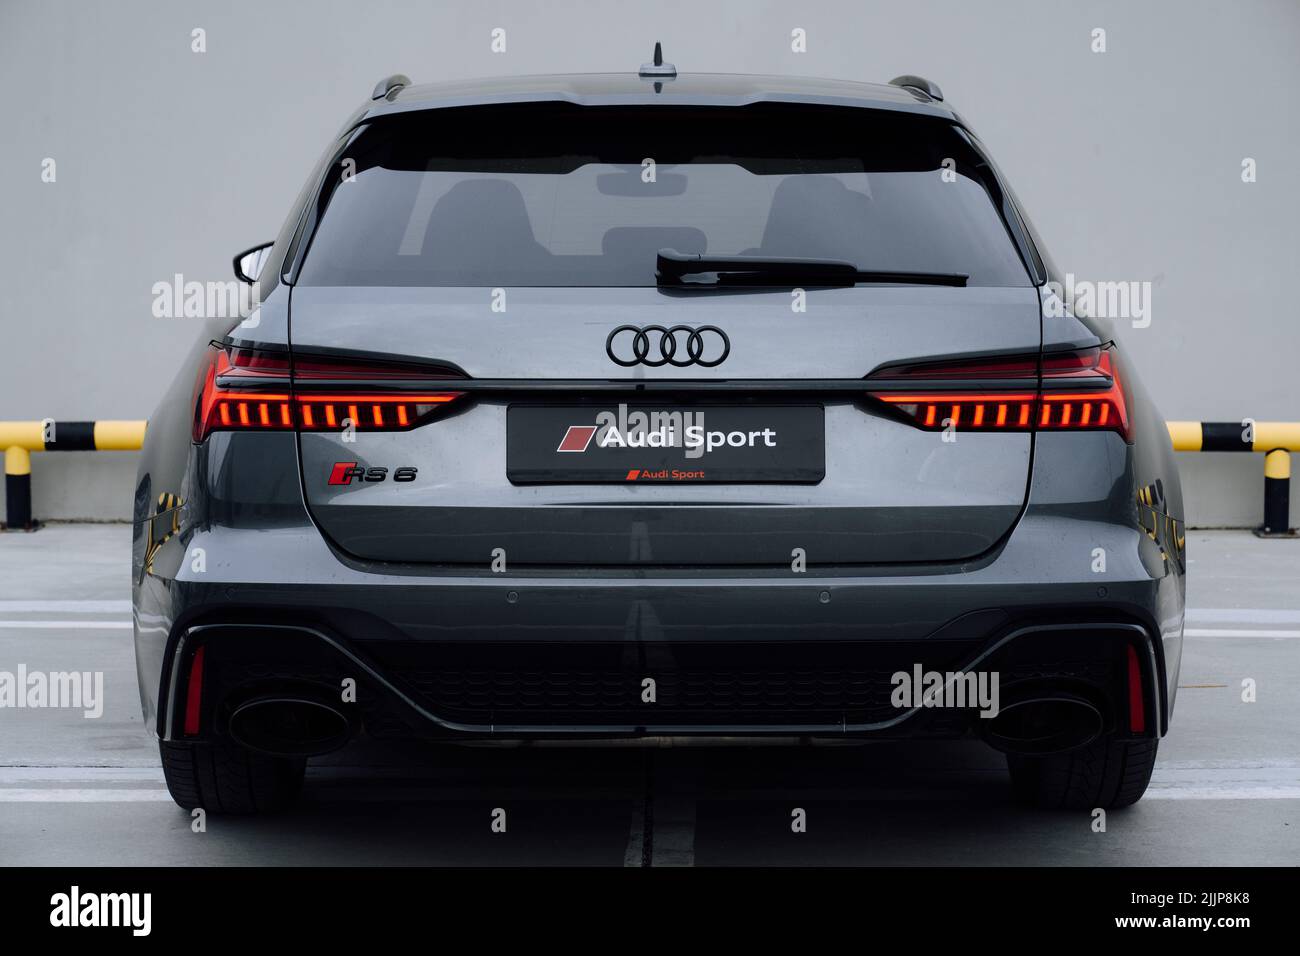 A brand new silver Audi RS 6 in a parking lot Stock Photo